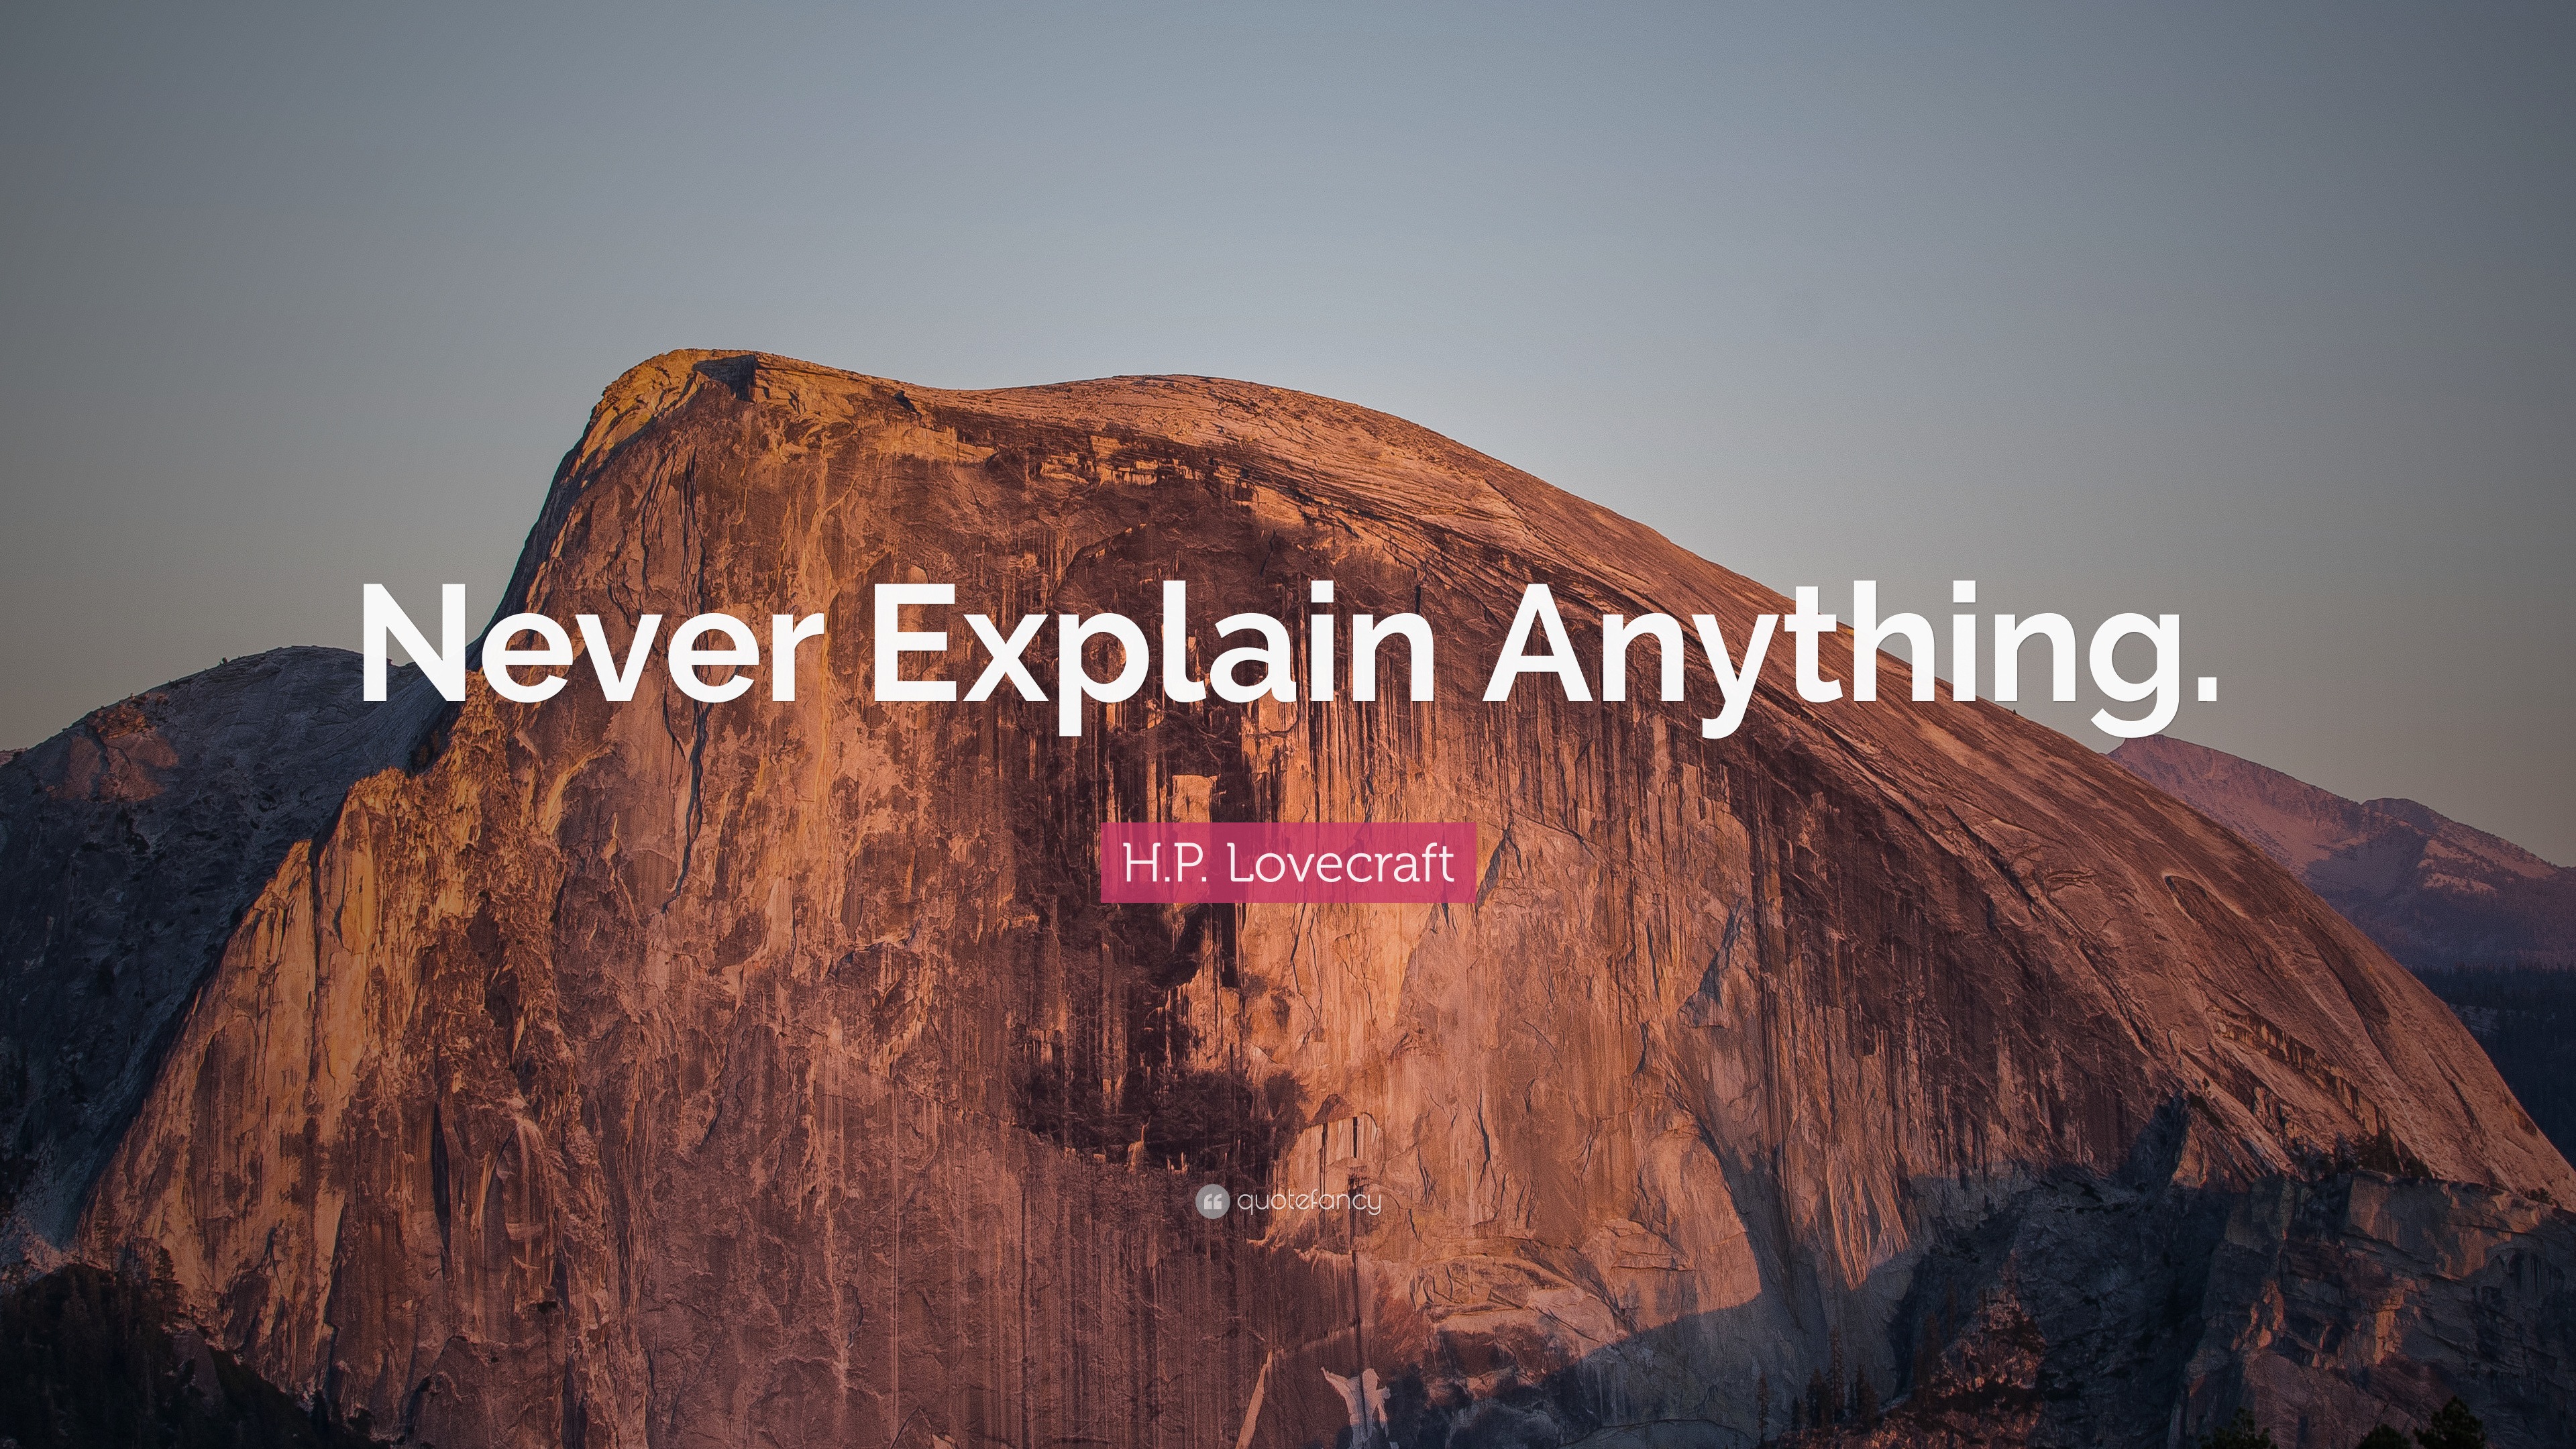 H.P. Lovecraft Quote: "Never Explain Anything." (12 wallpapers) - Quotefancy